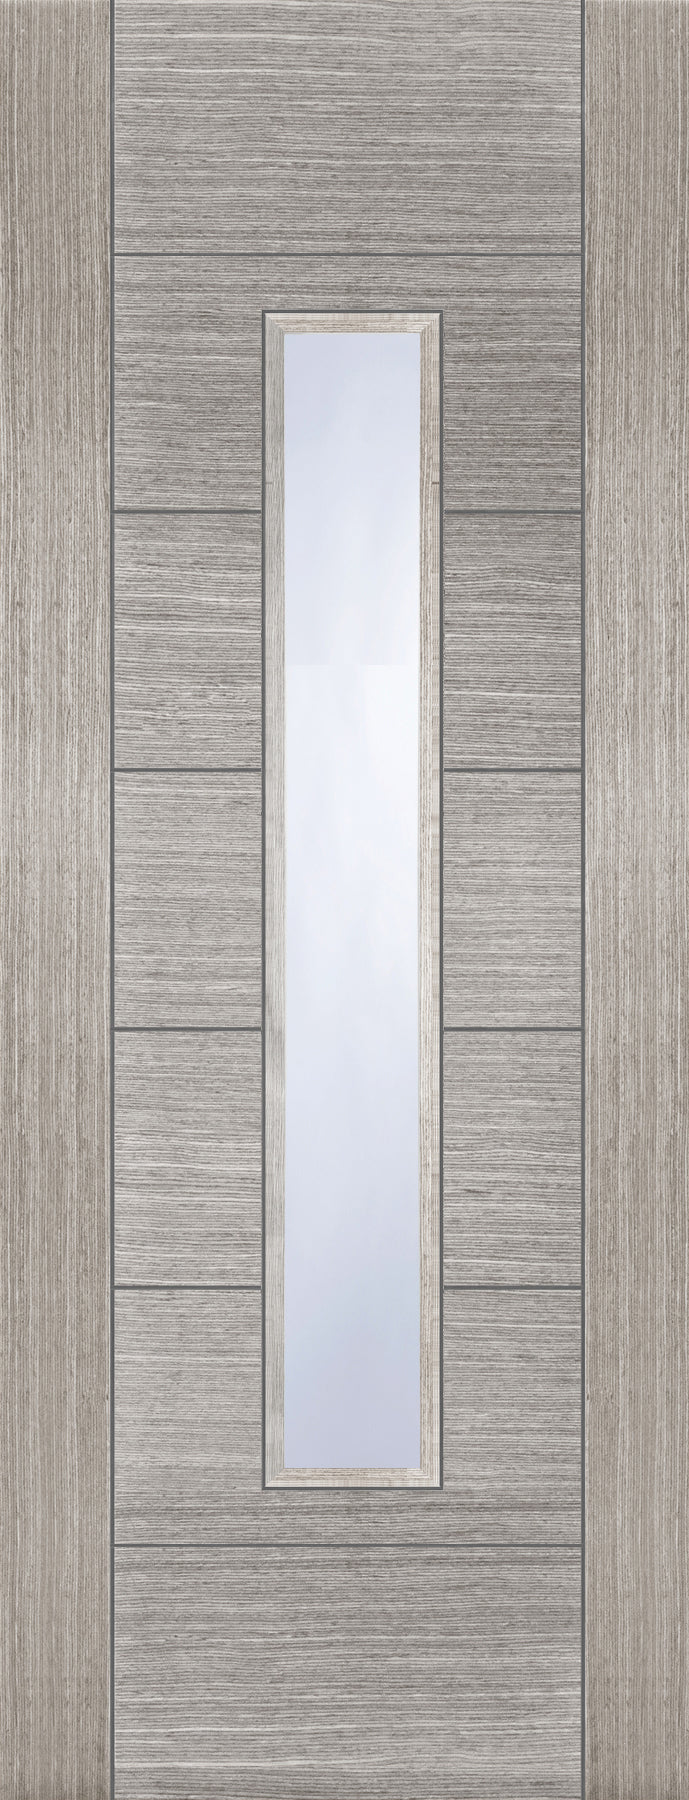 PM Mendes Light Grey Corsica 18G Clear Glass FD30 Prefinished Door